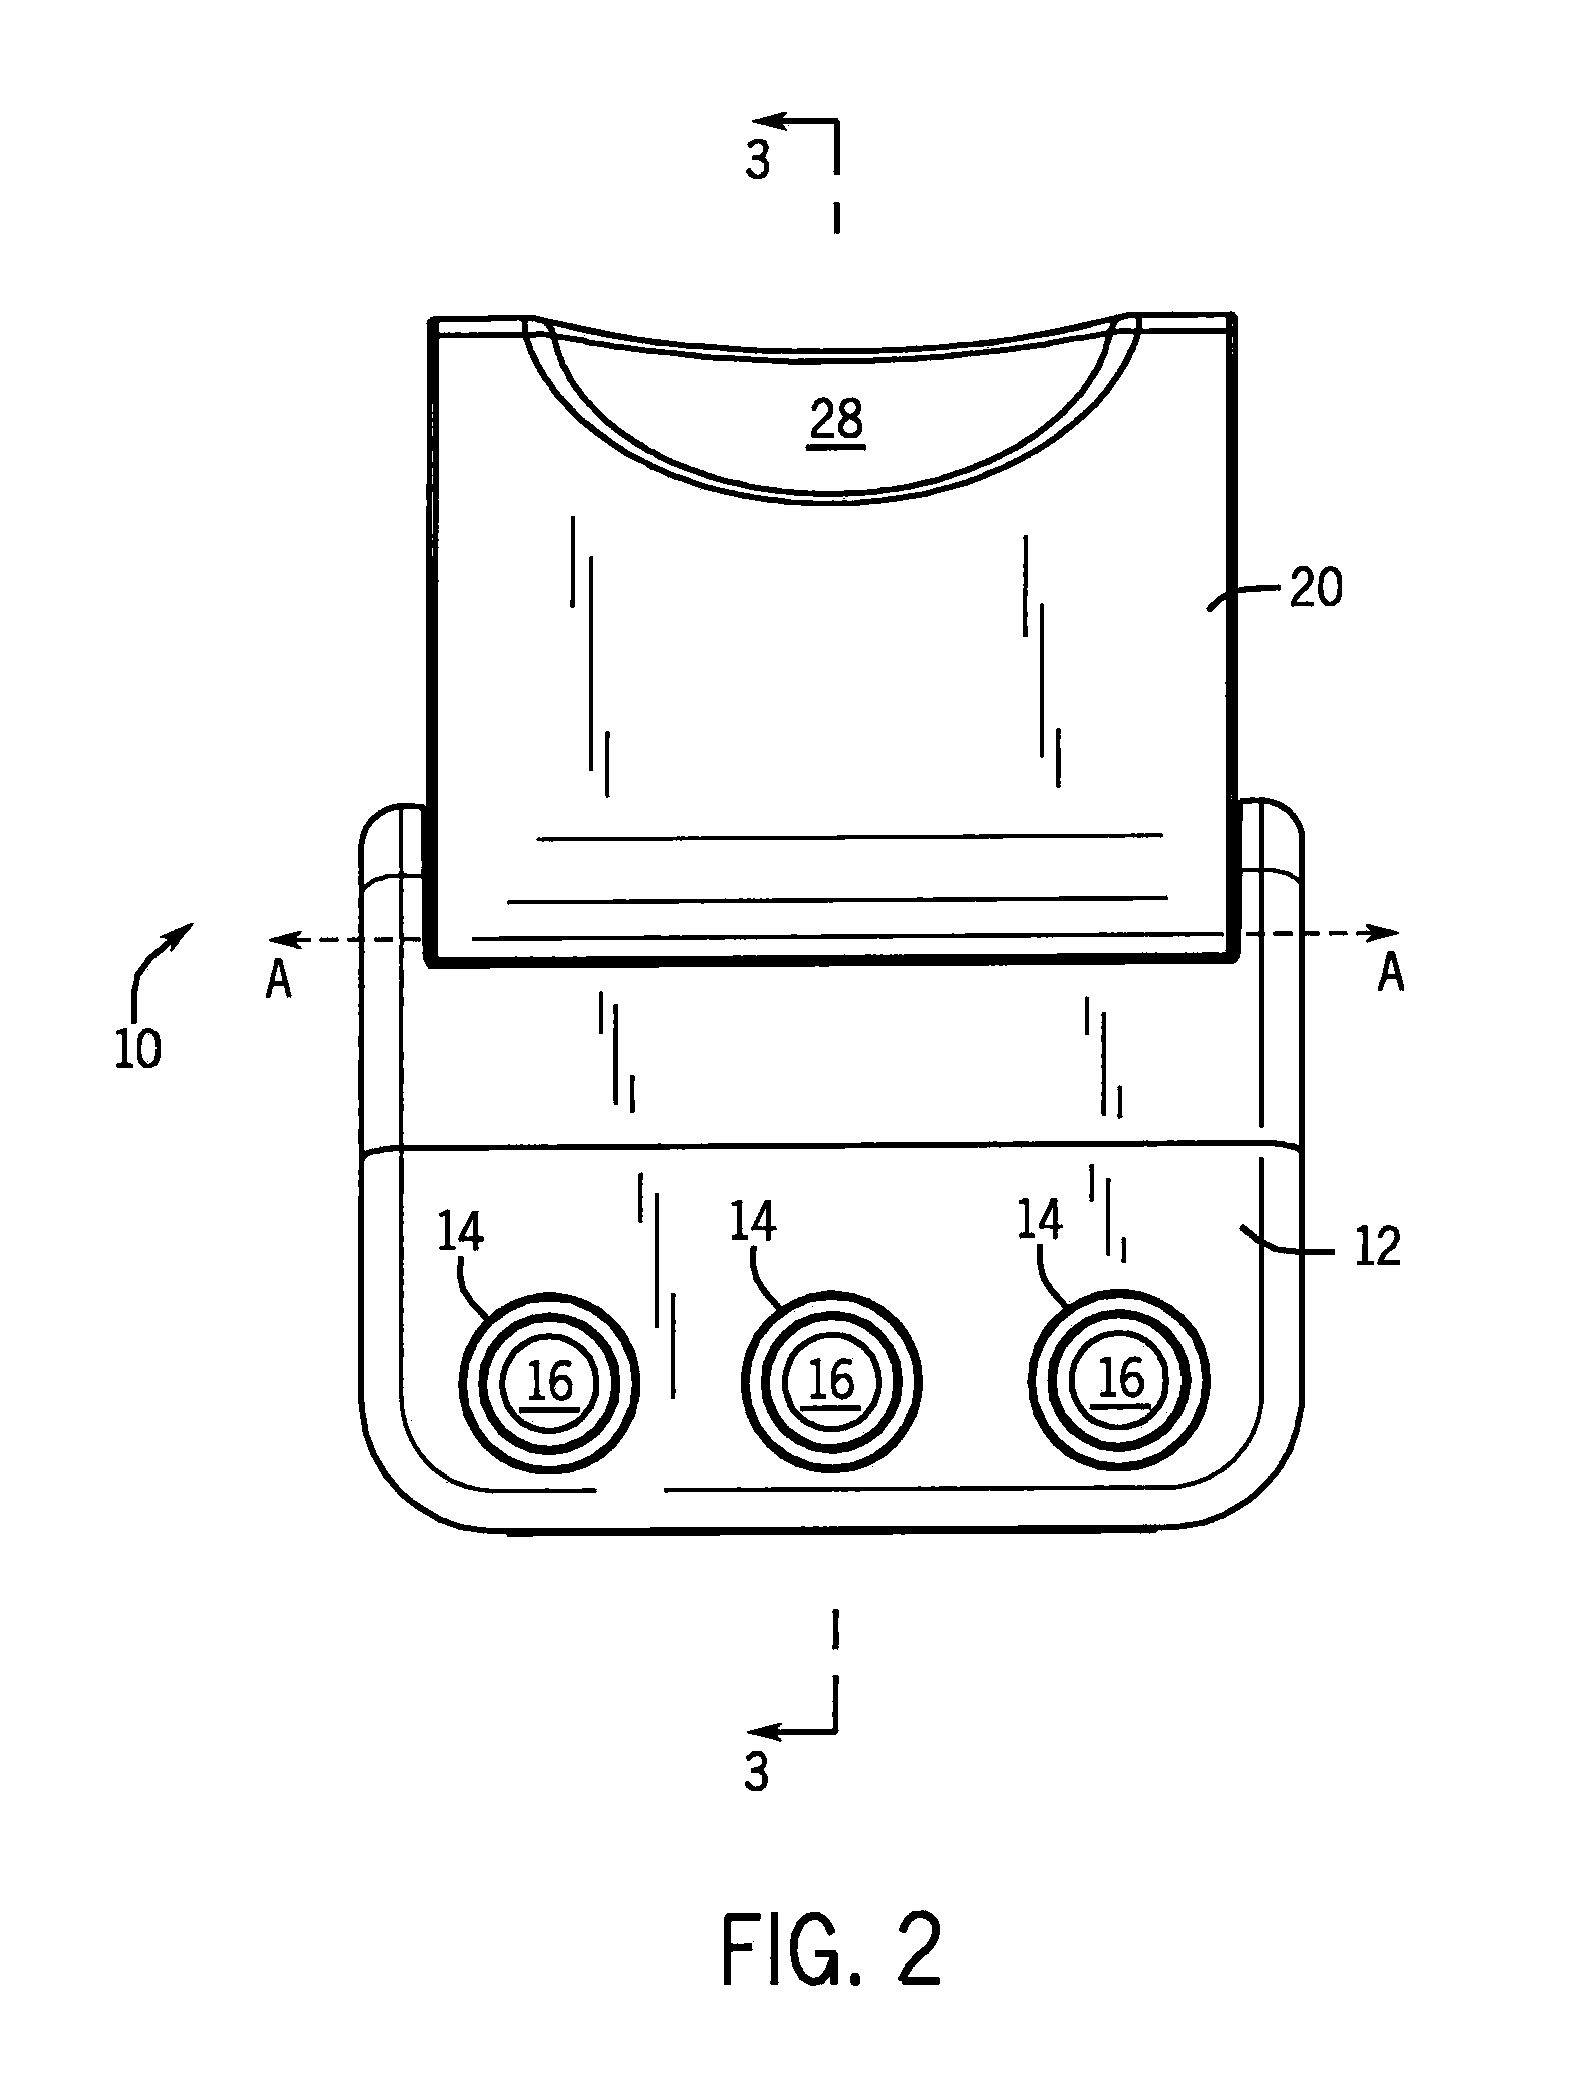 Insulation displacement connector